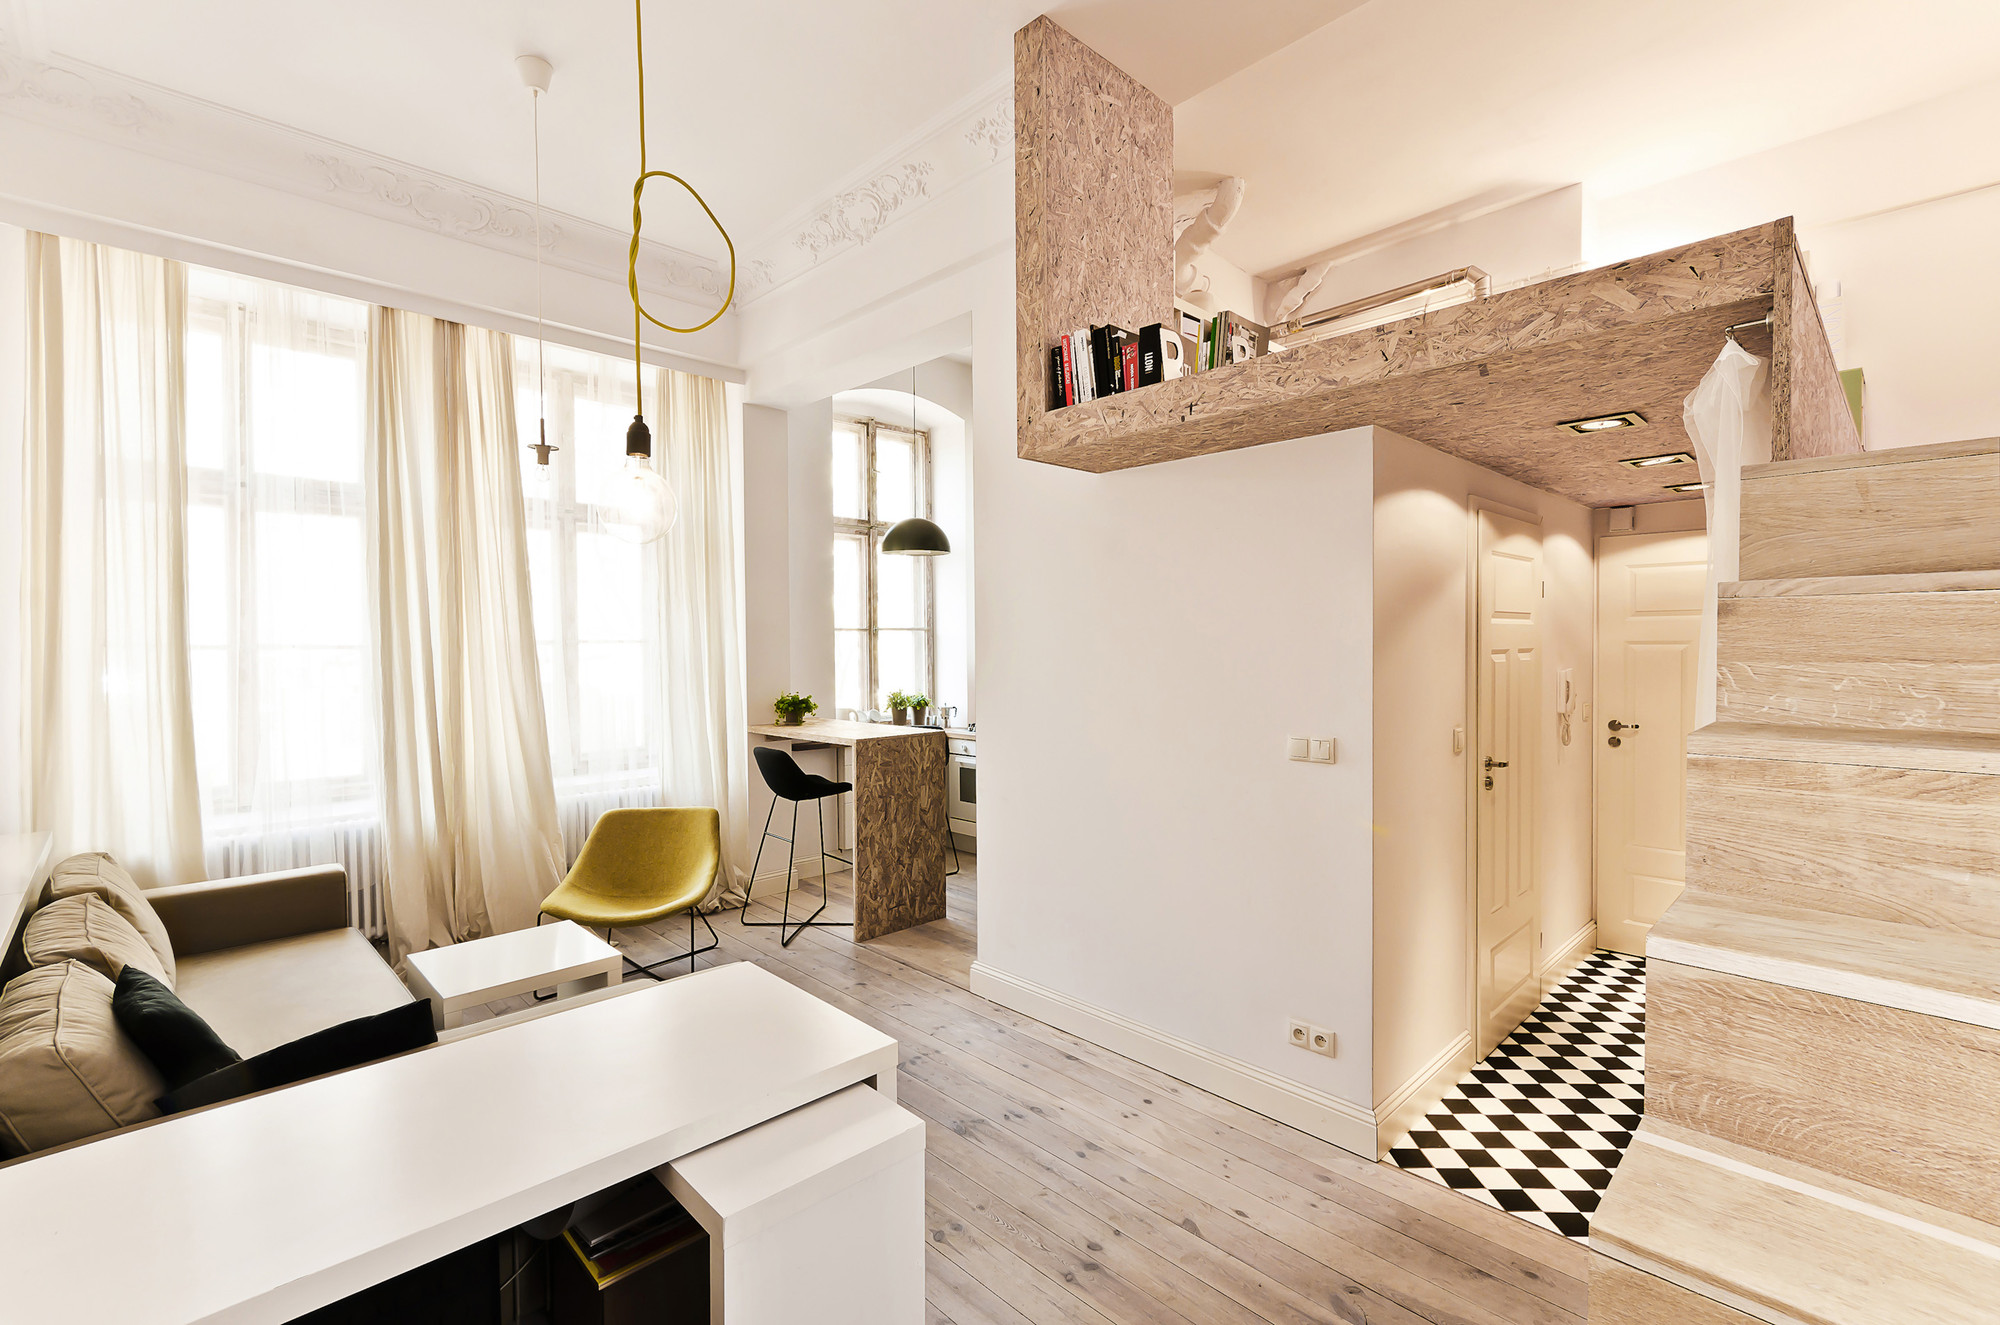 29 sqm 3xa 6 OSB Was Used To Build a Mezzanine in This Tiny 29m² Apartment